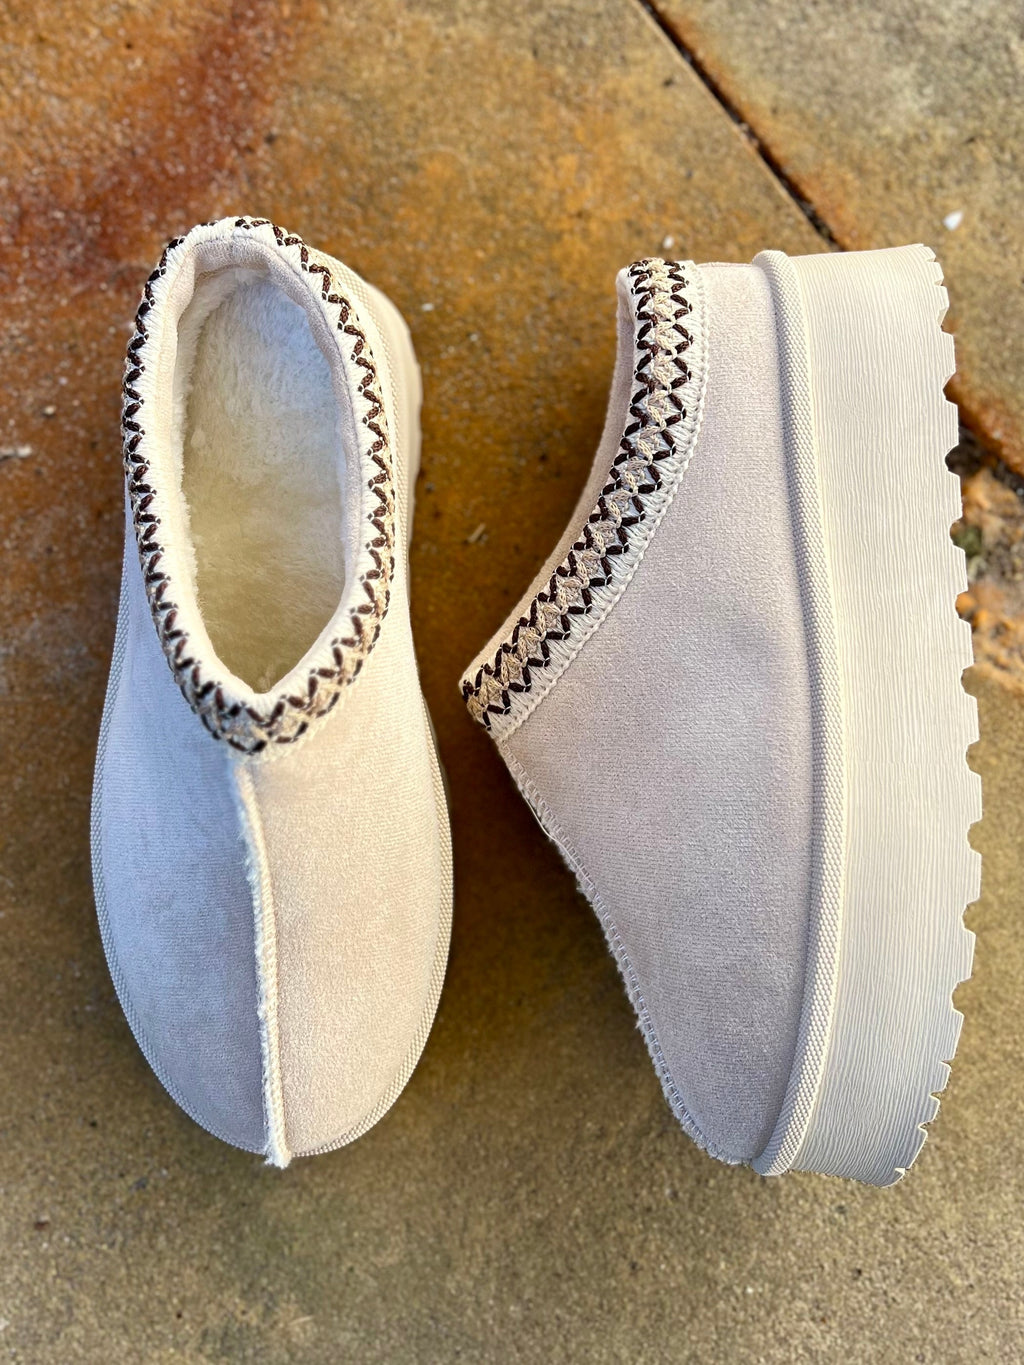 Don't Phase Me Slippers | gussieduponline